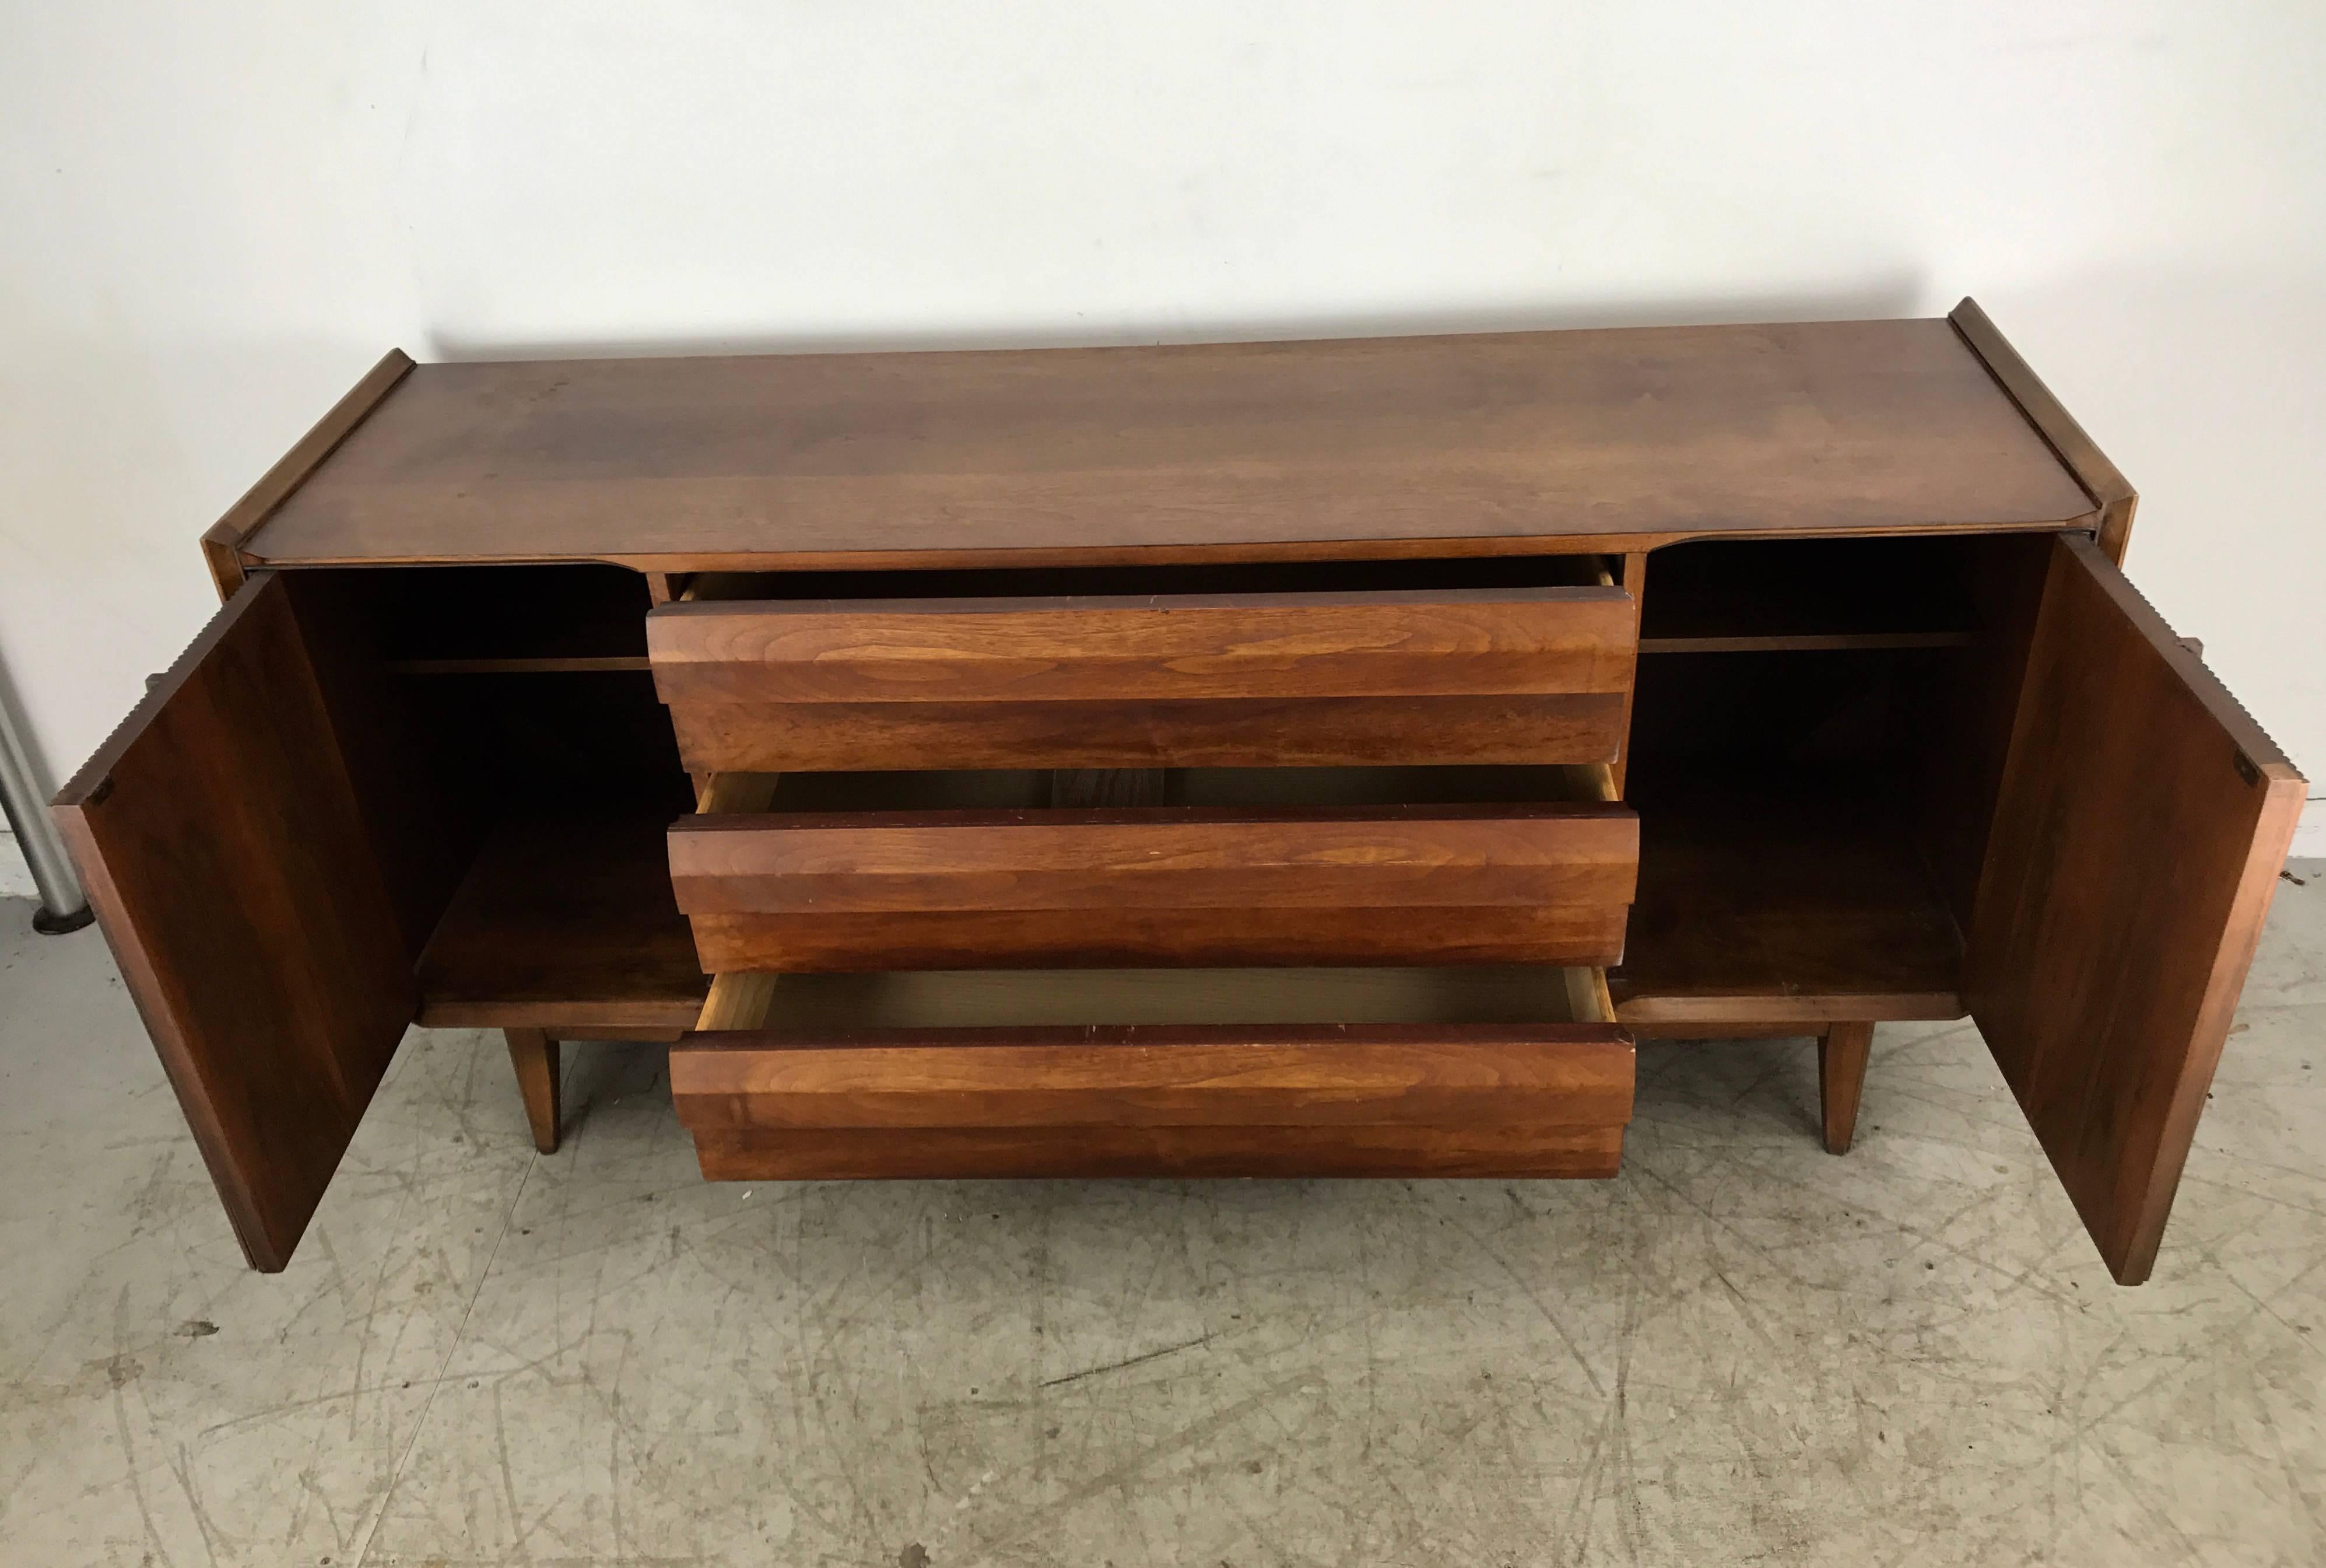 Mid-Century Modern Modernist Server/Credenza, Two-Tone Walnut Finish, Made by Lane Furniture Co.